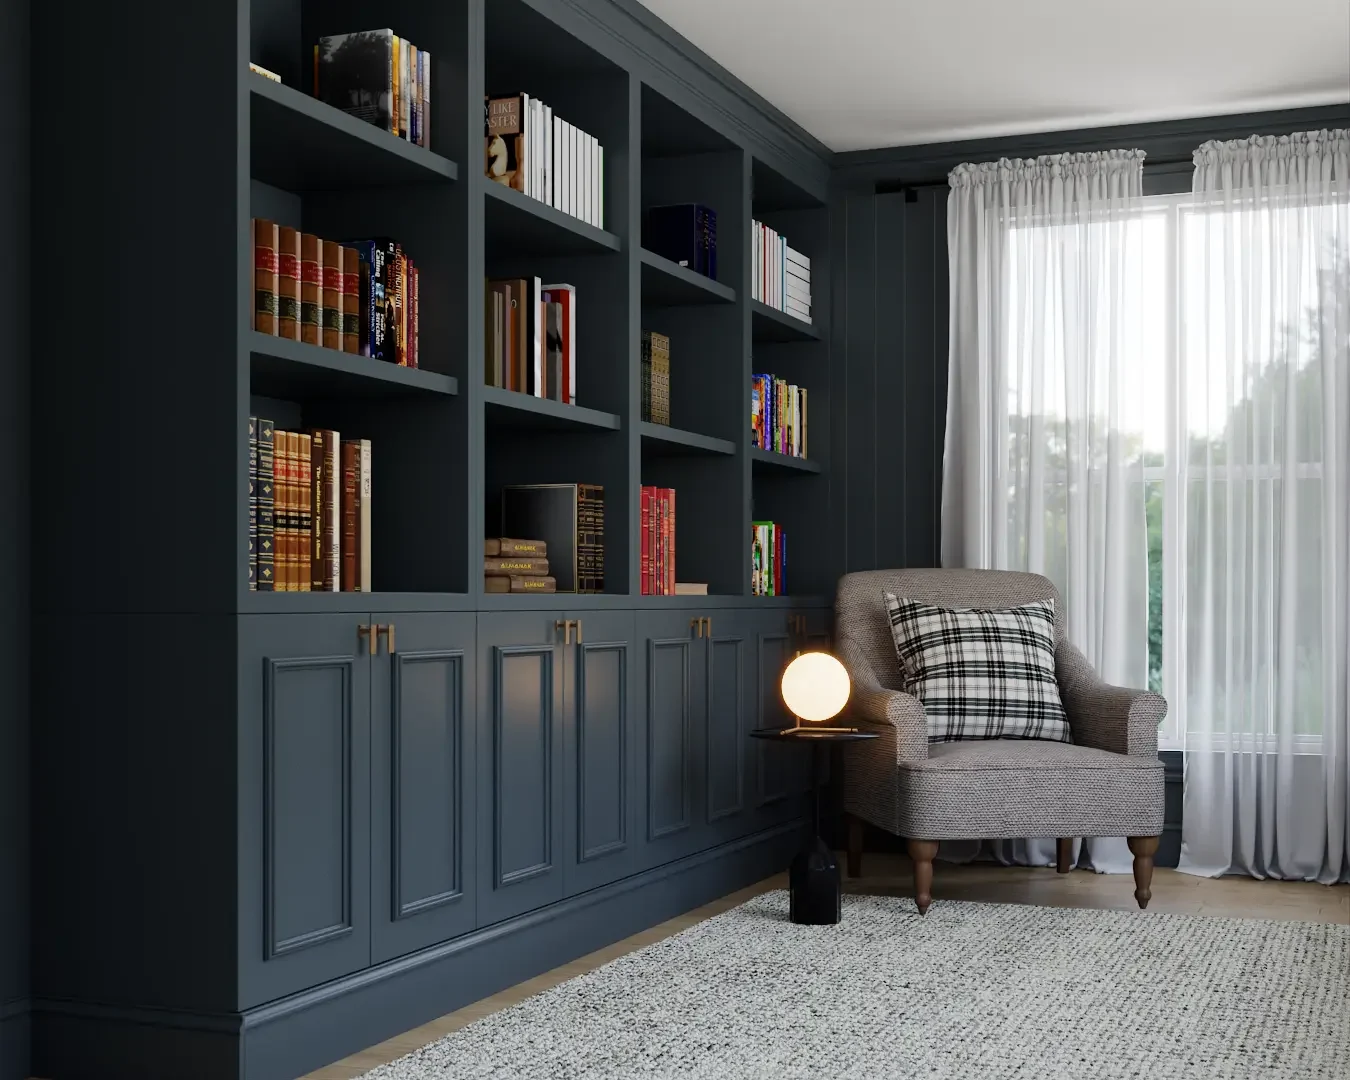 Elegant home office with classic dark bookshelves and a comfortable reading chair, designed by Debora, an online interior design service based in New York City.